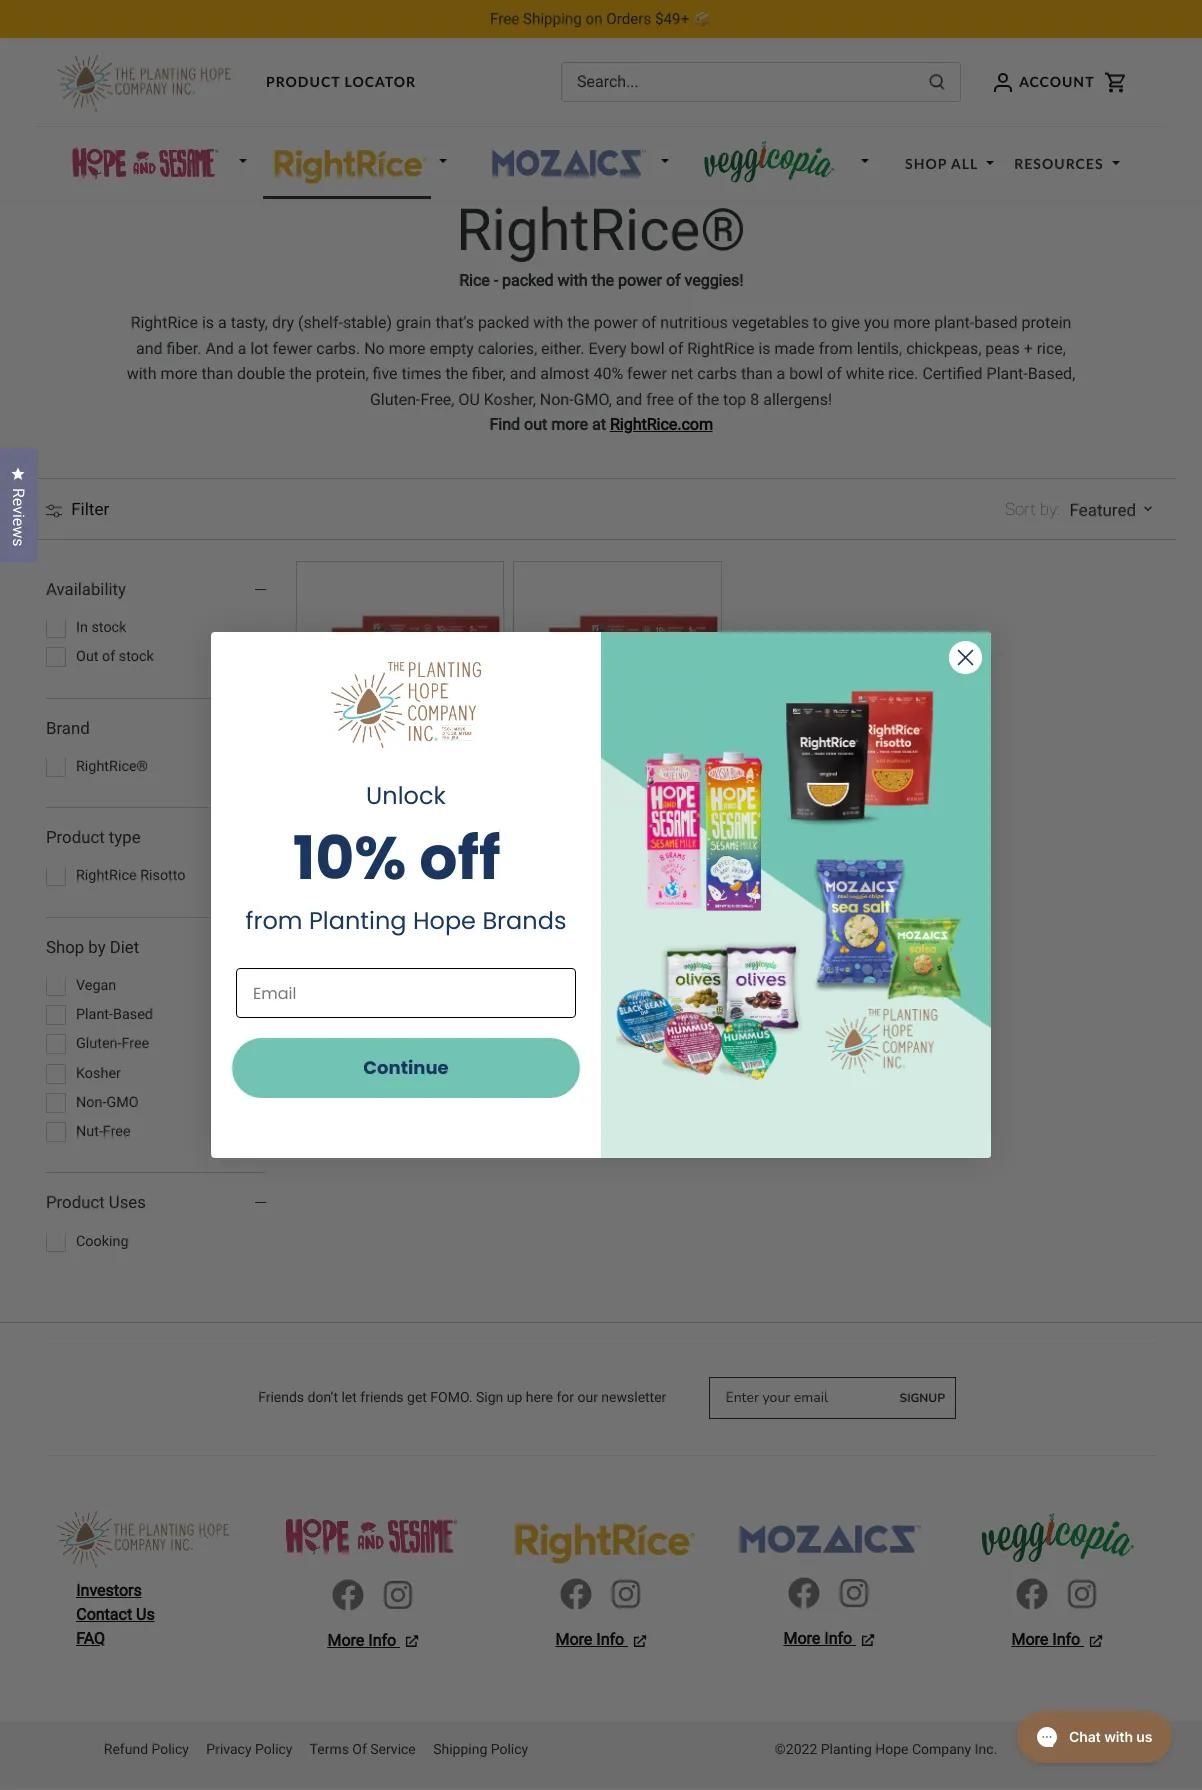 Screenshot 3 of RightRice (Example Shopify Food and Beverage Website)